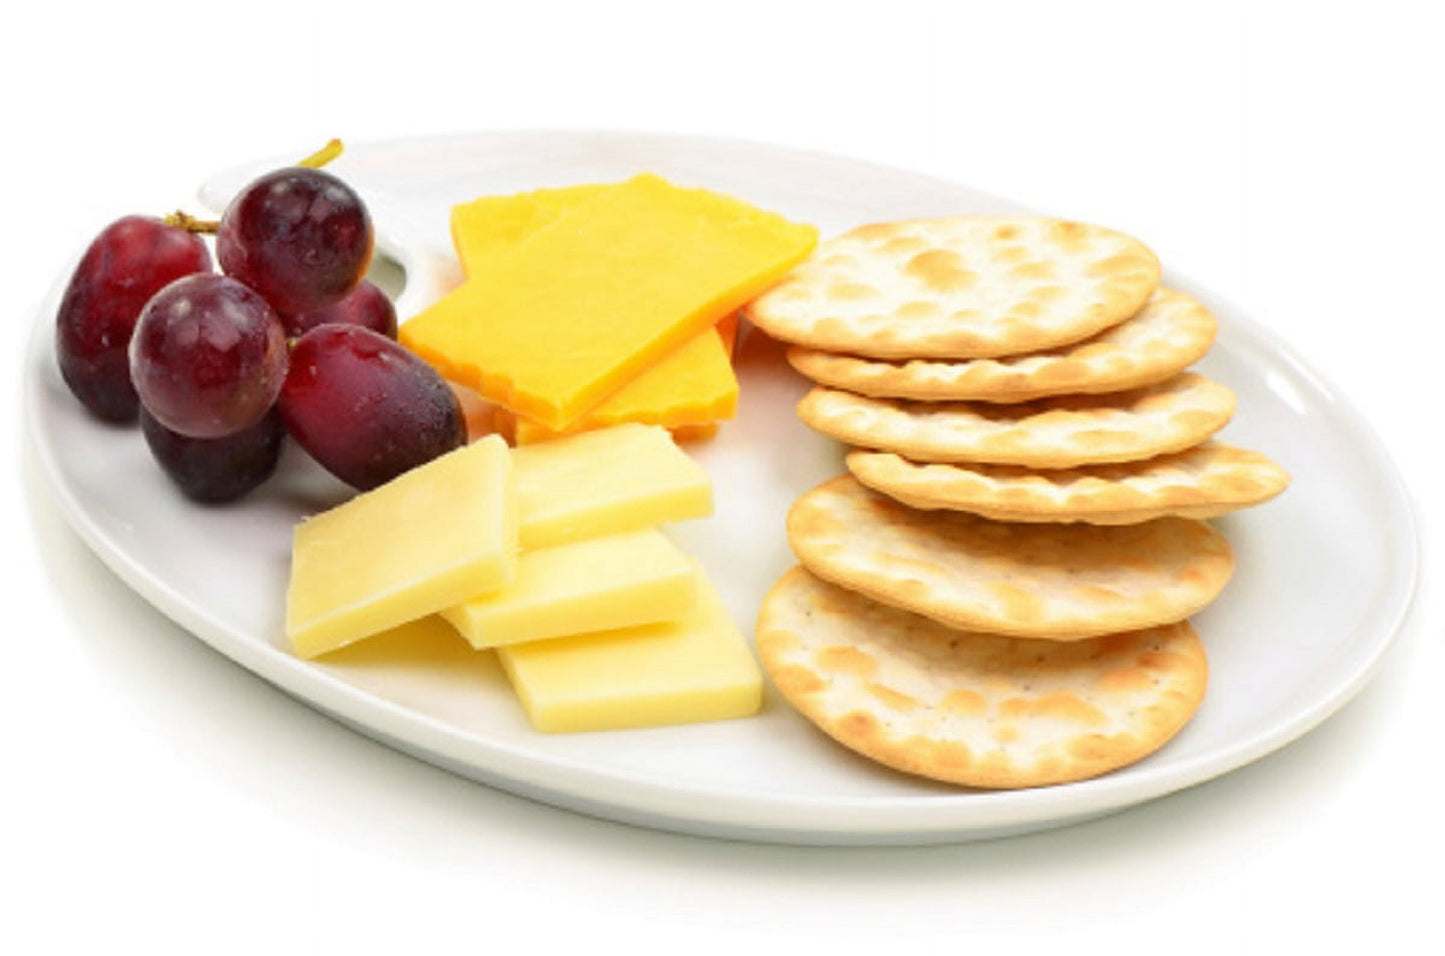 & Crackers Gift Basket -Cheese and Cracker Gift Box. 100%  and Cracker Gift Set. Perfect Cheese Gift for Birthday Gifts, Holiday Gifts or 4Th of July Party Gifts.